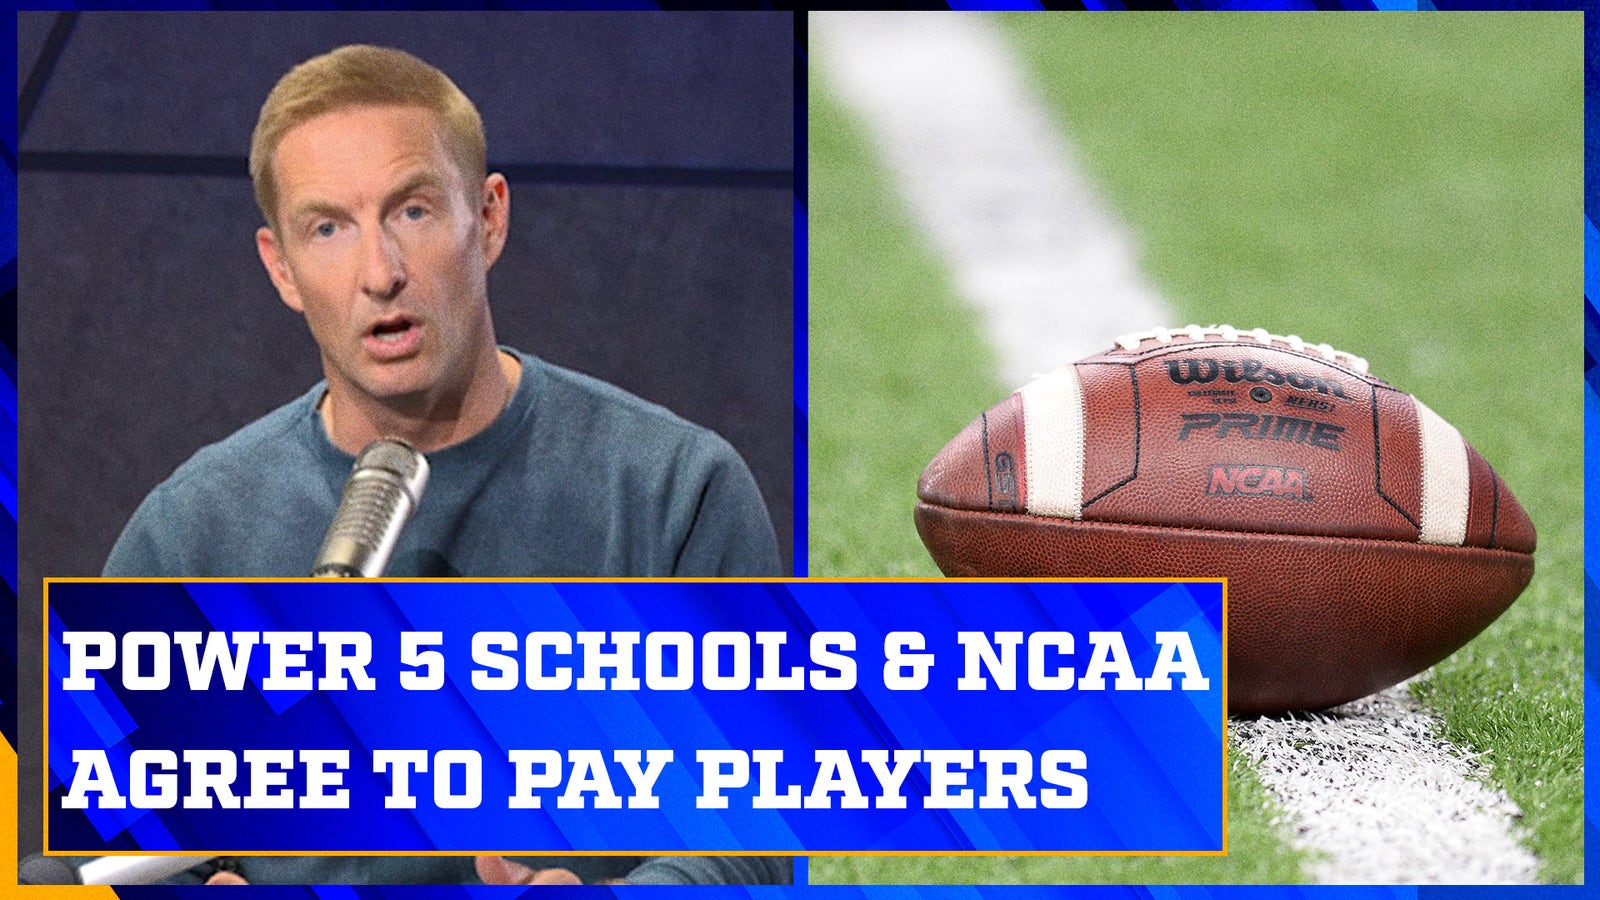 Power 5 schools, NCAA agree to allow schools to pay players directly